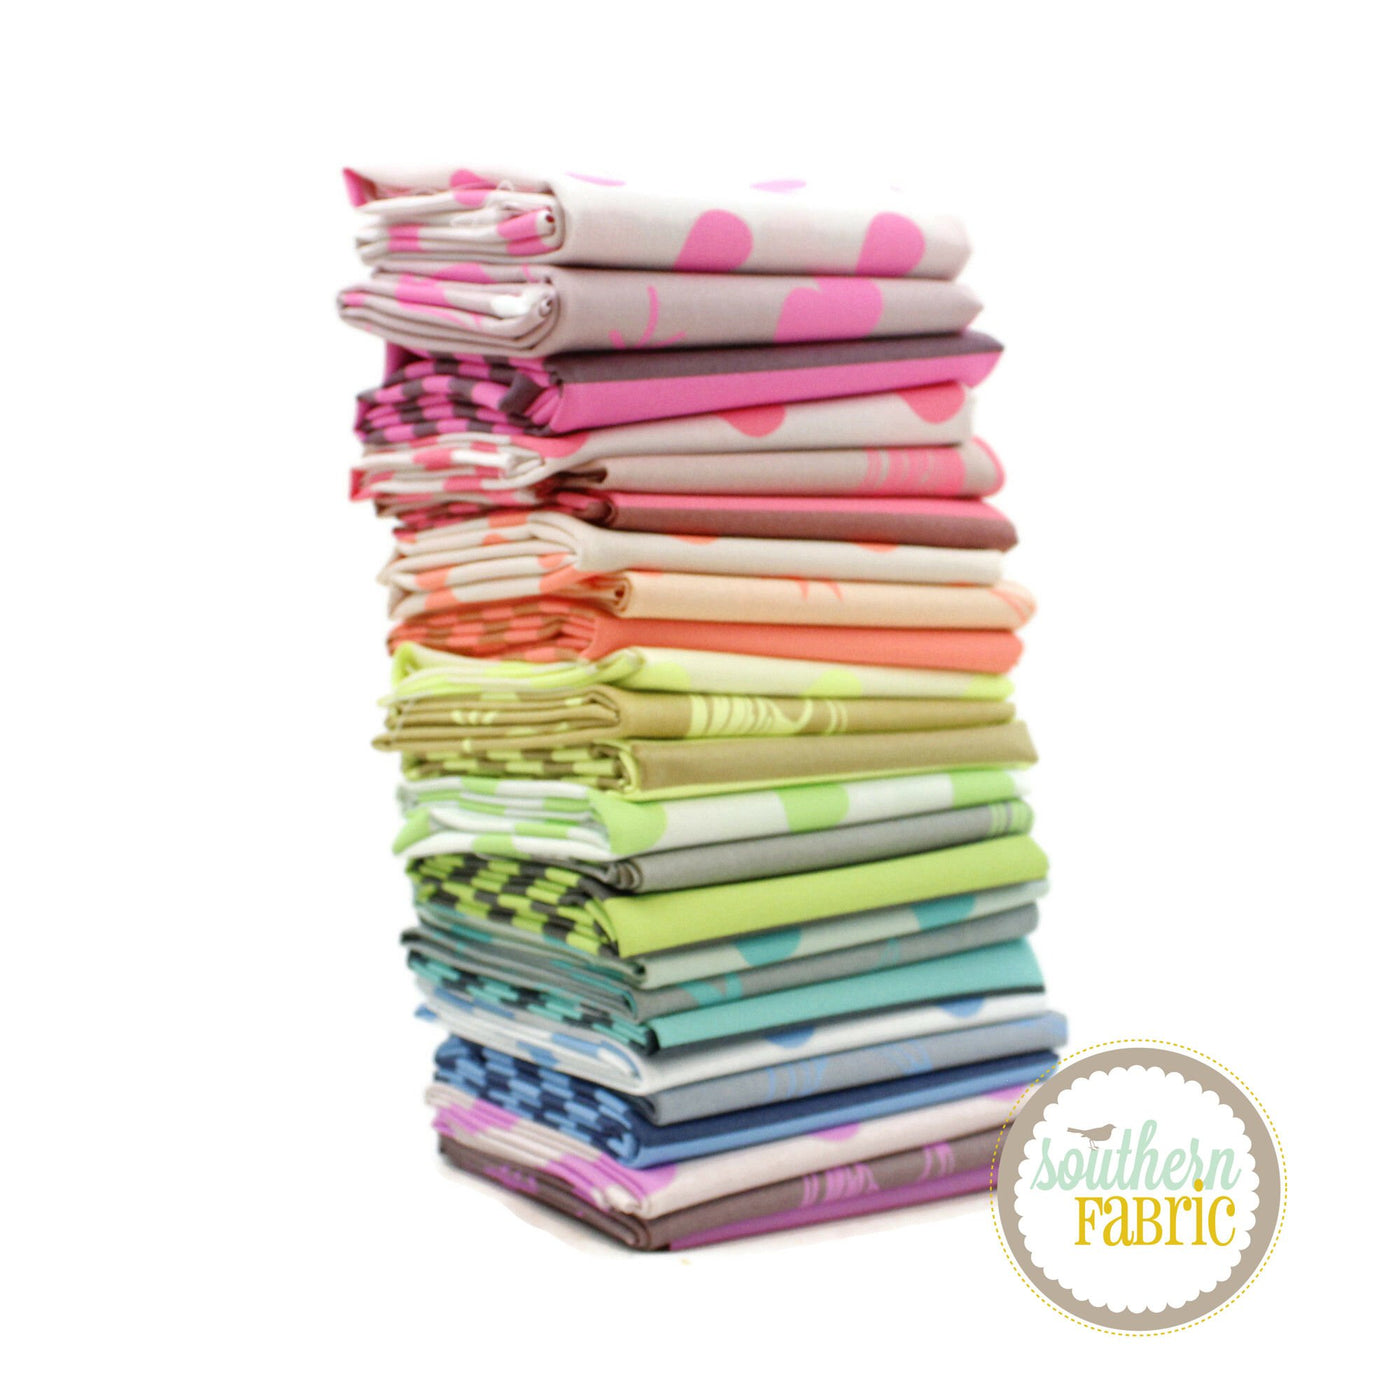 Tula Pink True Colors Quilt Fabric - Mineral - 13 piece Fat